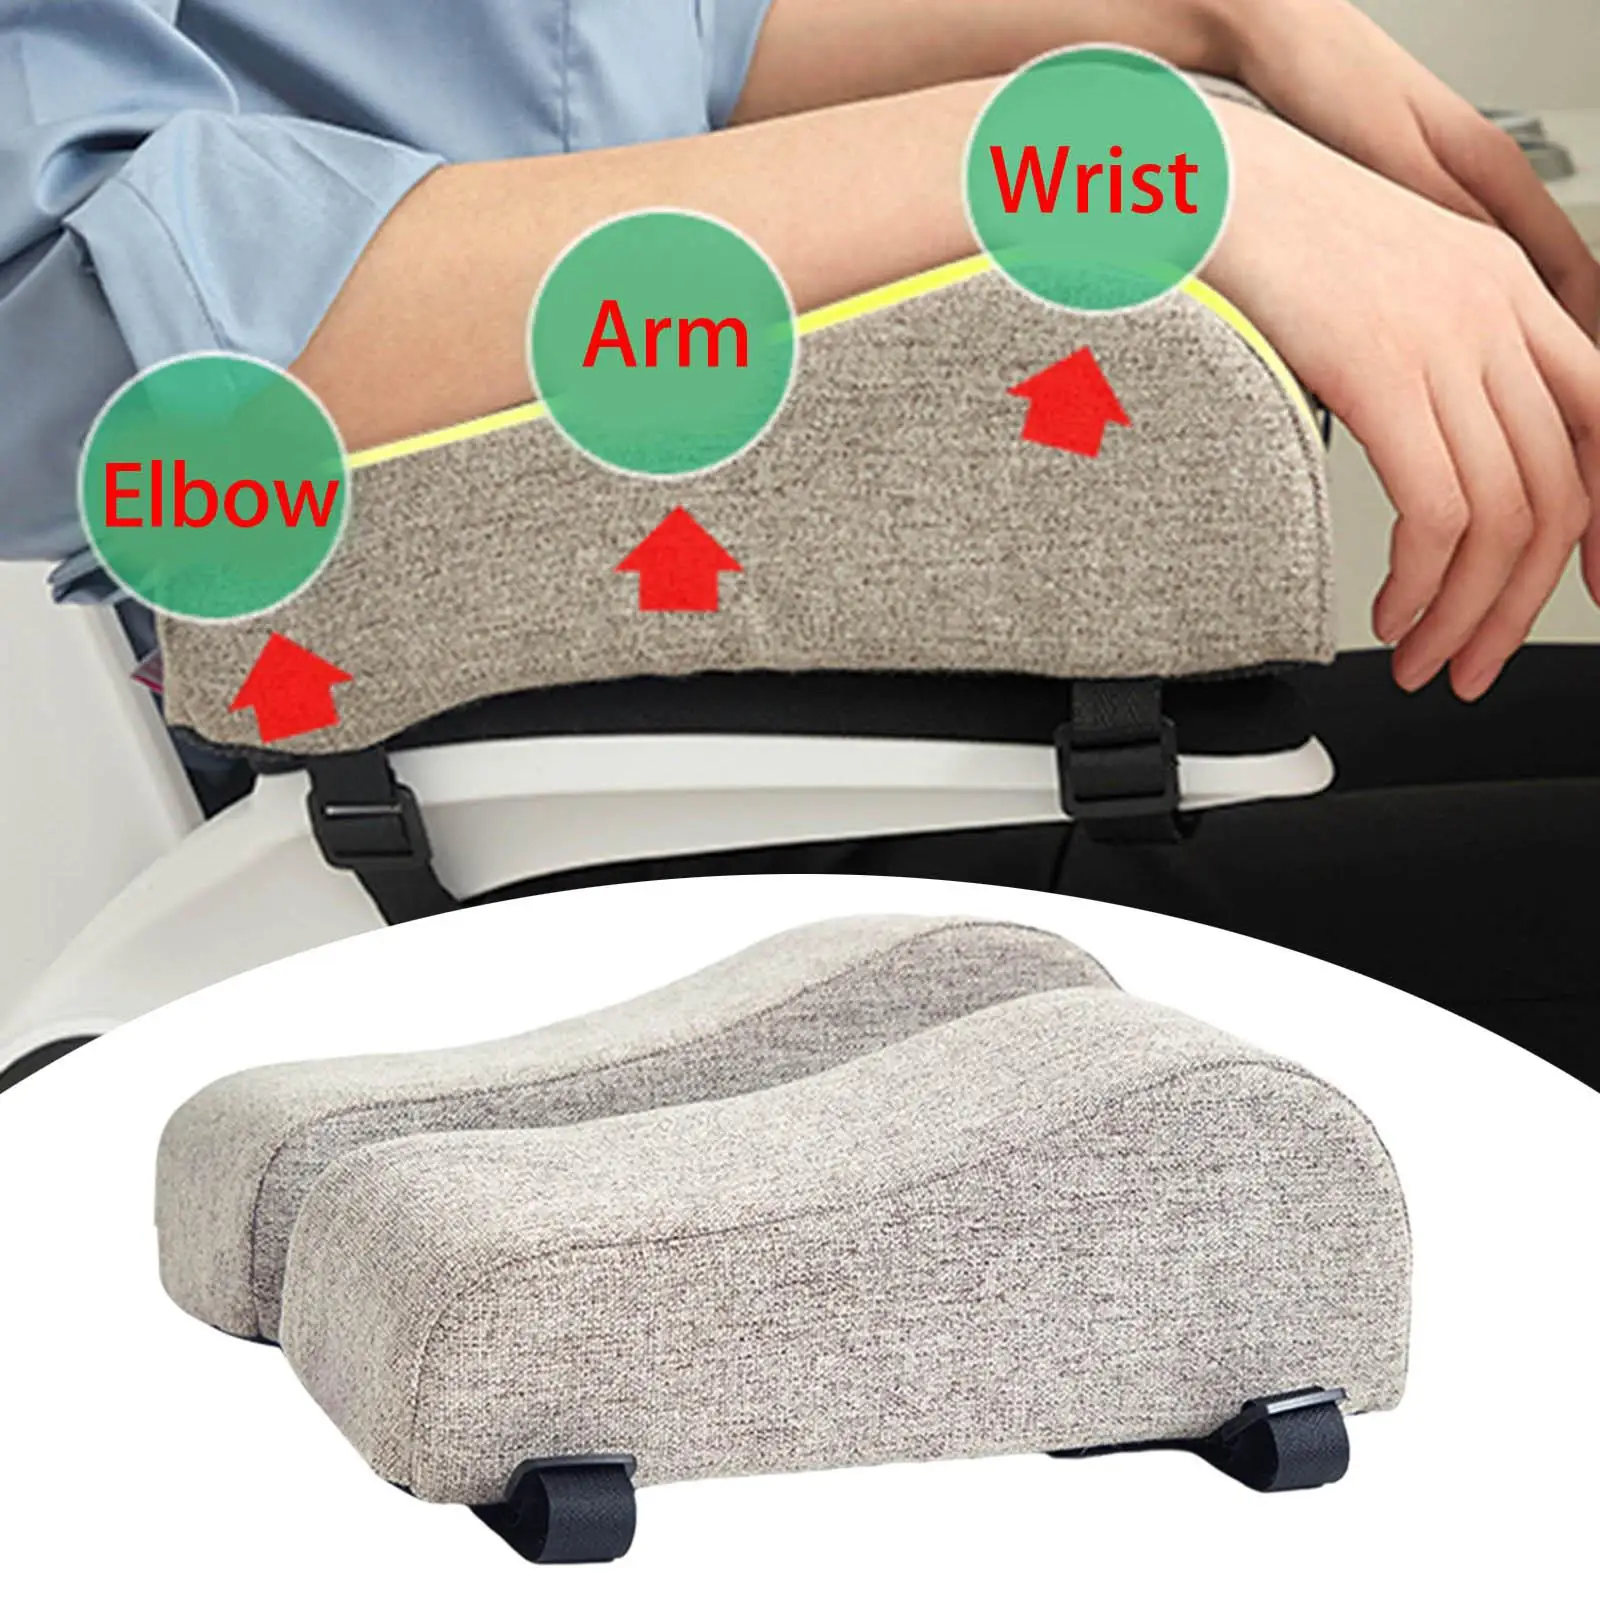 Chair Arm Pad Pressure Relief Soft Comfort Arm Rest Pad Elbow Armrest Cover Pads for Wheelchair Office Chair Gaming Chair